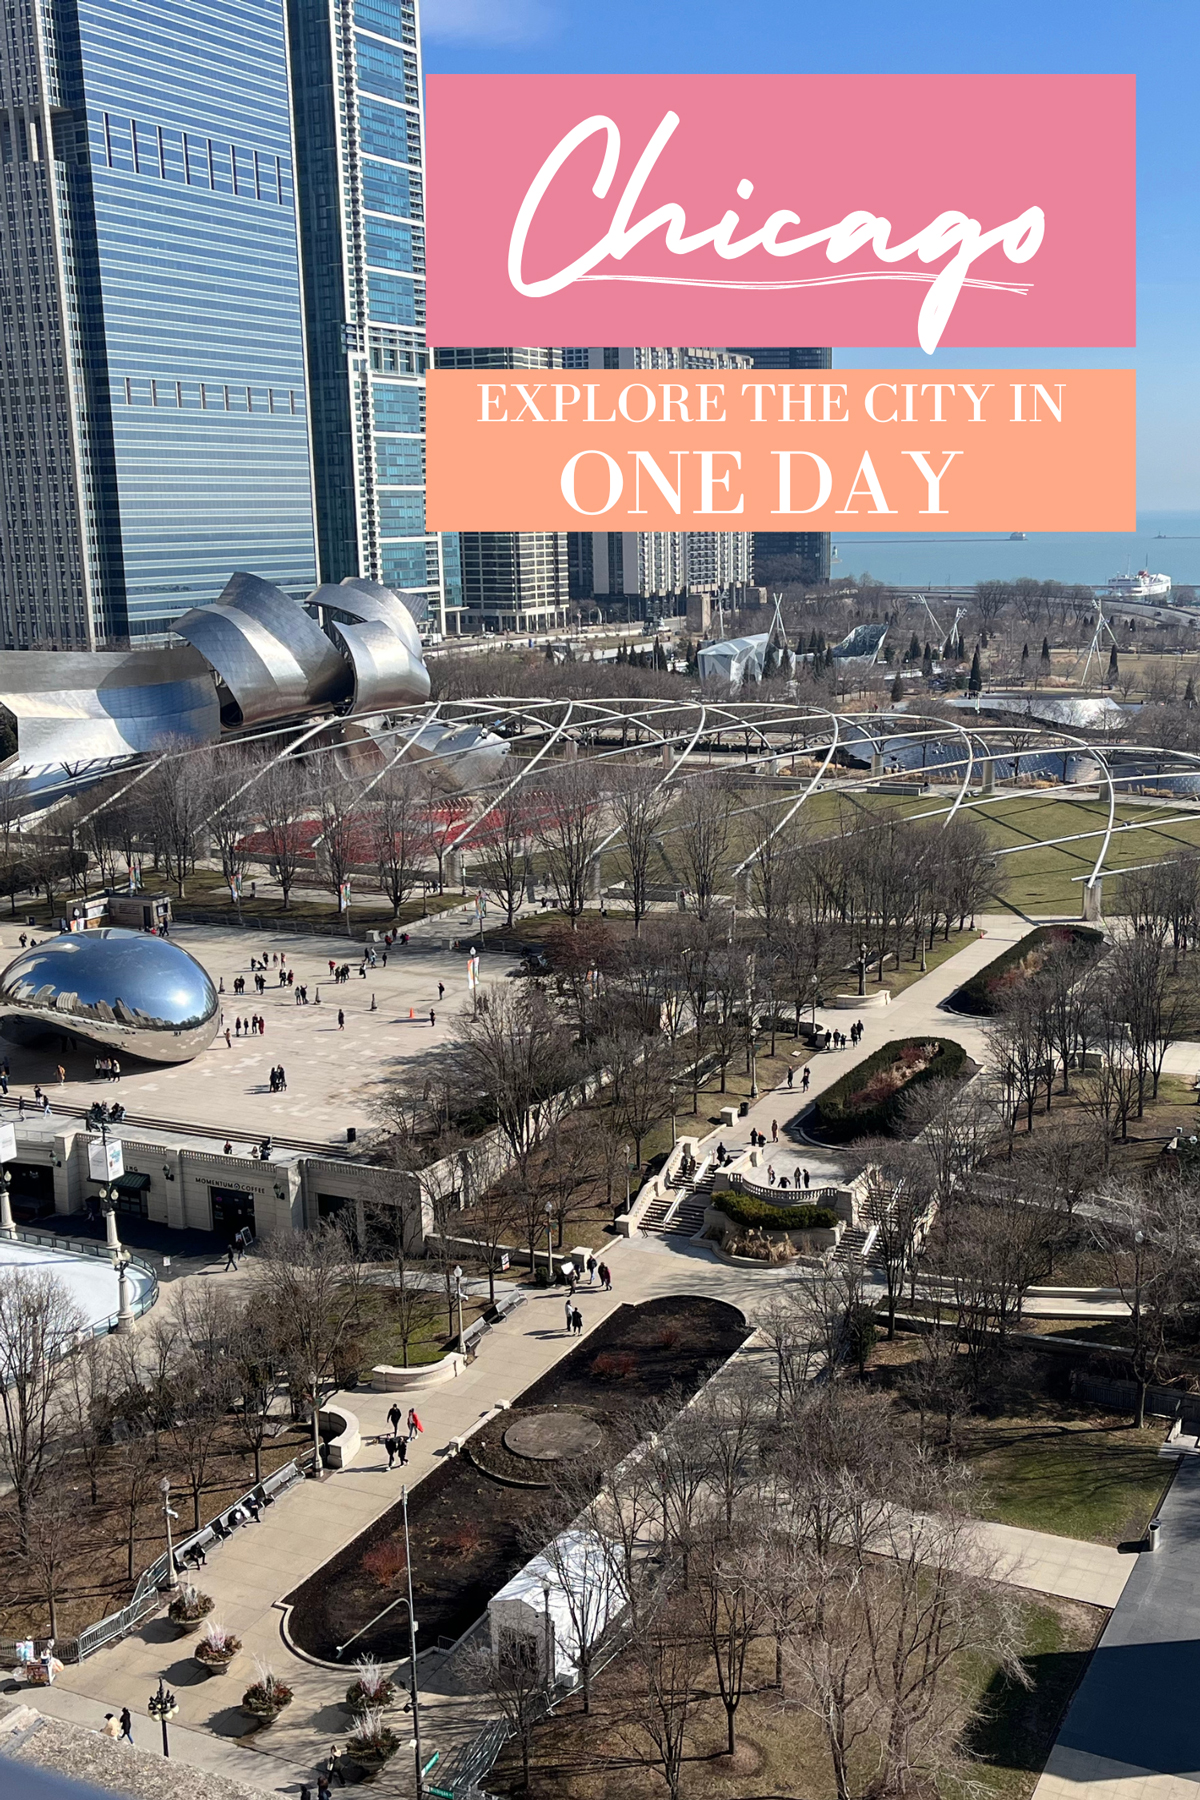 How to spend 1 day in chicago